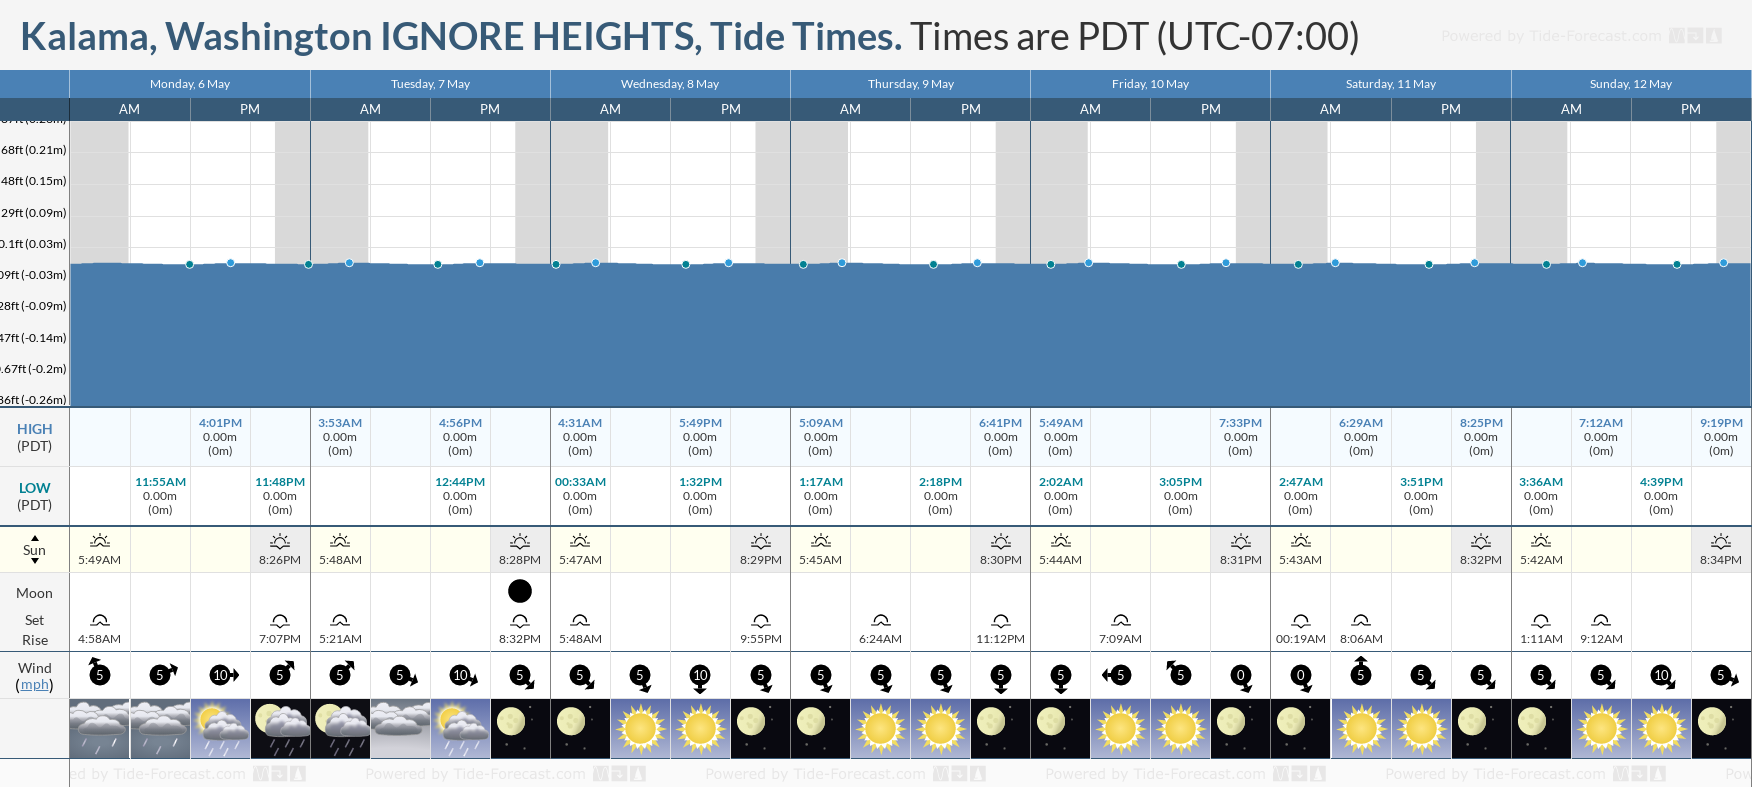 Kalama, Washington IGNORE HEIGHTS Tide Chart including high and low tide tide times for the next 7 days